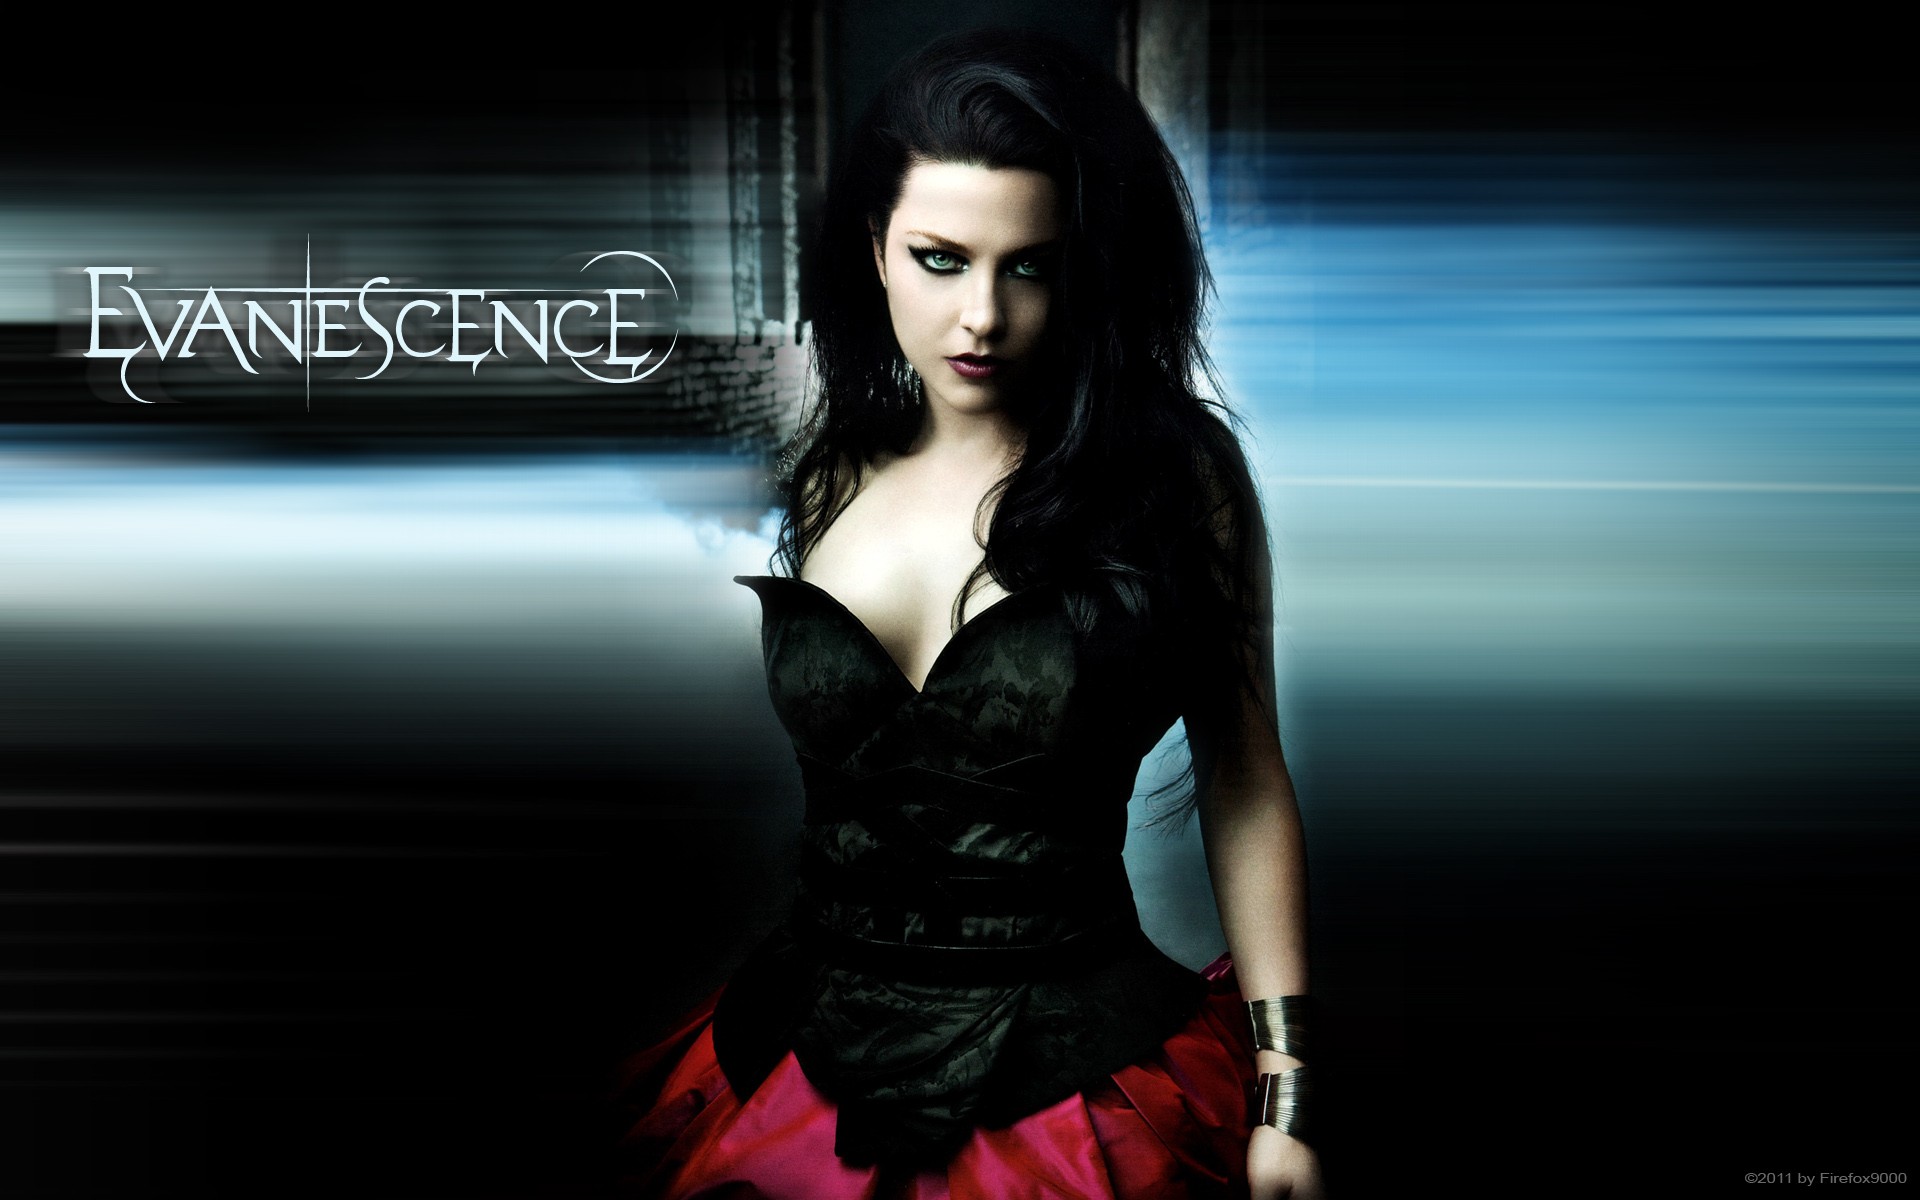 evanescence Wallpapers evanescence Myspace Backgrounds evanescence